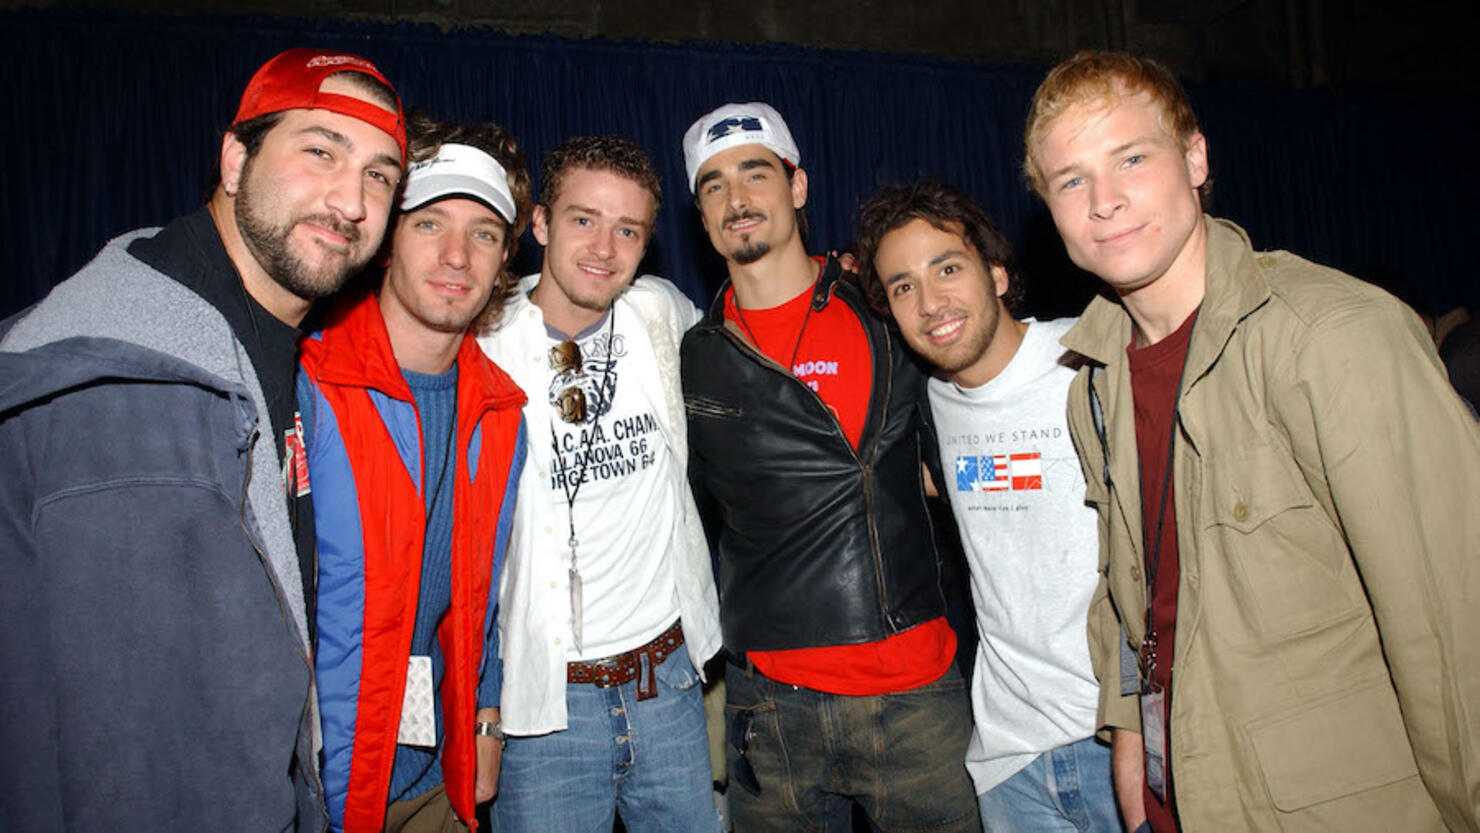 Backstreet Boys open to the idea of joint tour with NSYNC - Good